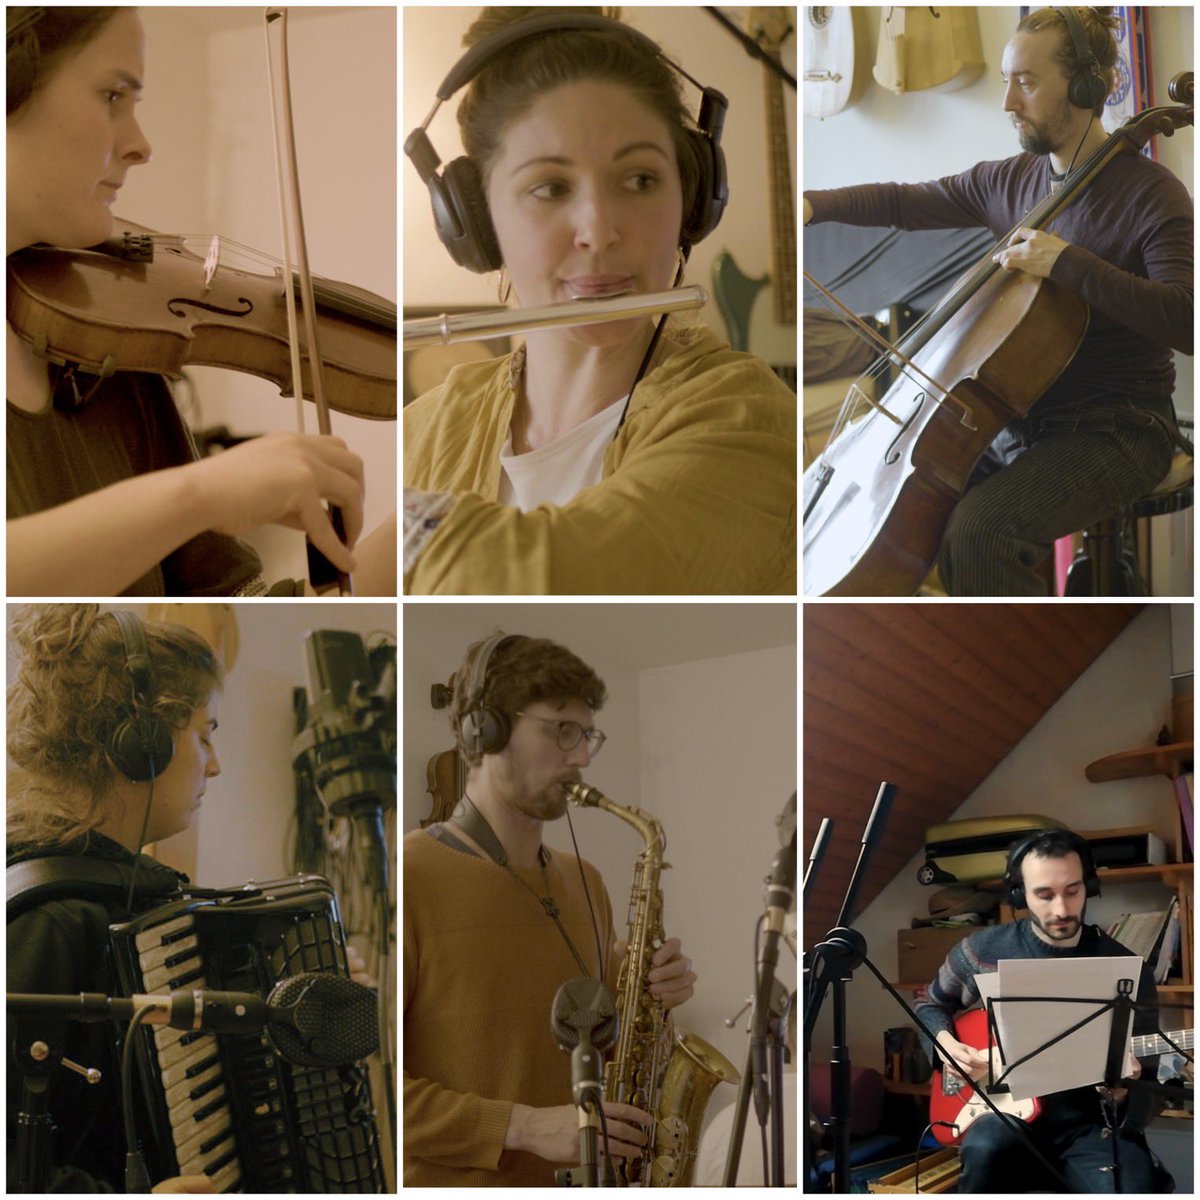 Wonderful musicians who helped me with their talent ✨, creativity and 
open ears to create the music for “FAR: Changing Tides”. 

📸 Jo Flüeler / Hannah Adriana Müller / Philipp Hillebrand / Annina Rusch / Rosanna Zünd / Anatole Buccella

#gamesoundtrack #farchangingtides